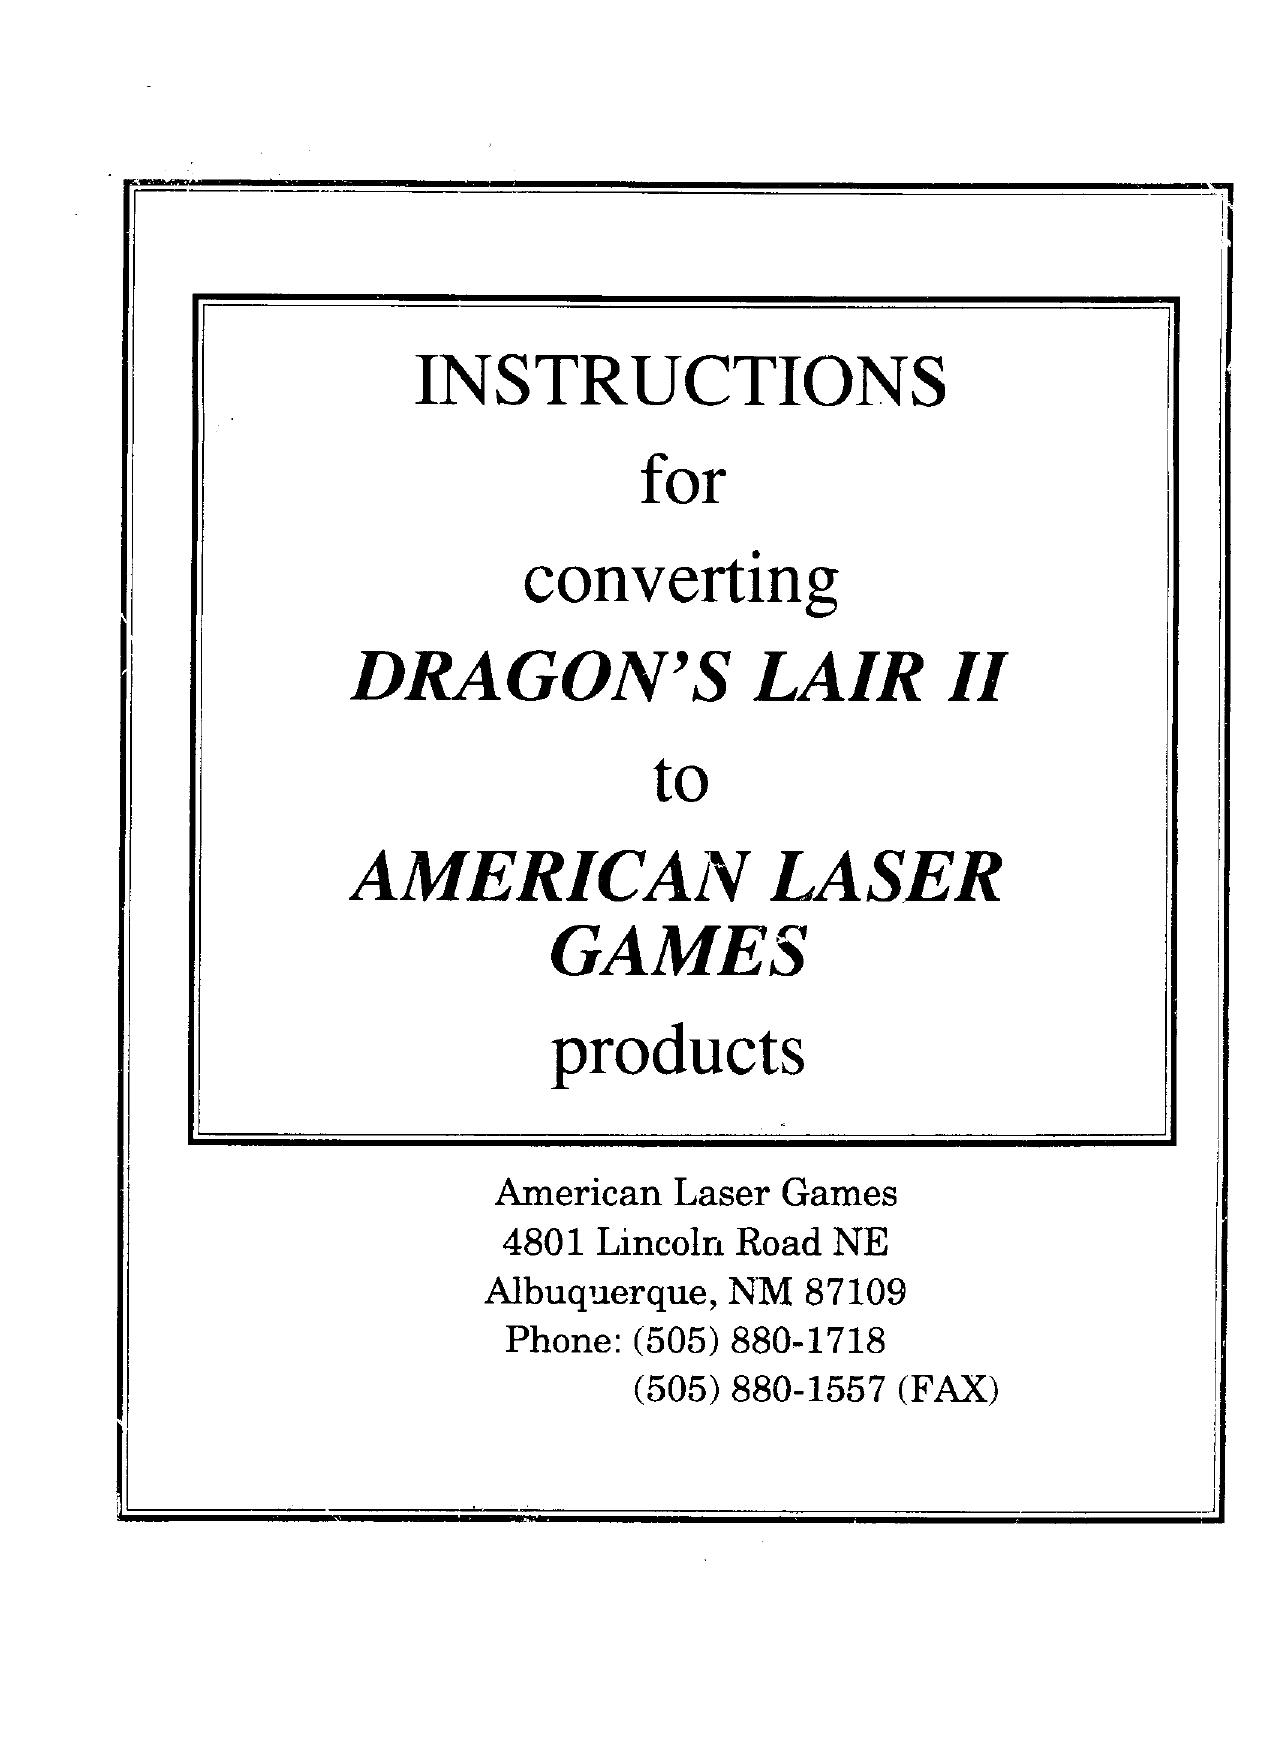 Dragons Lair 2 to American Laser Games